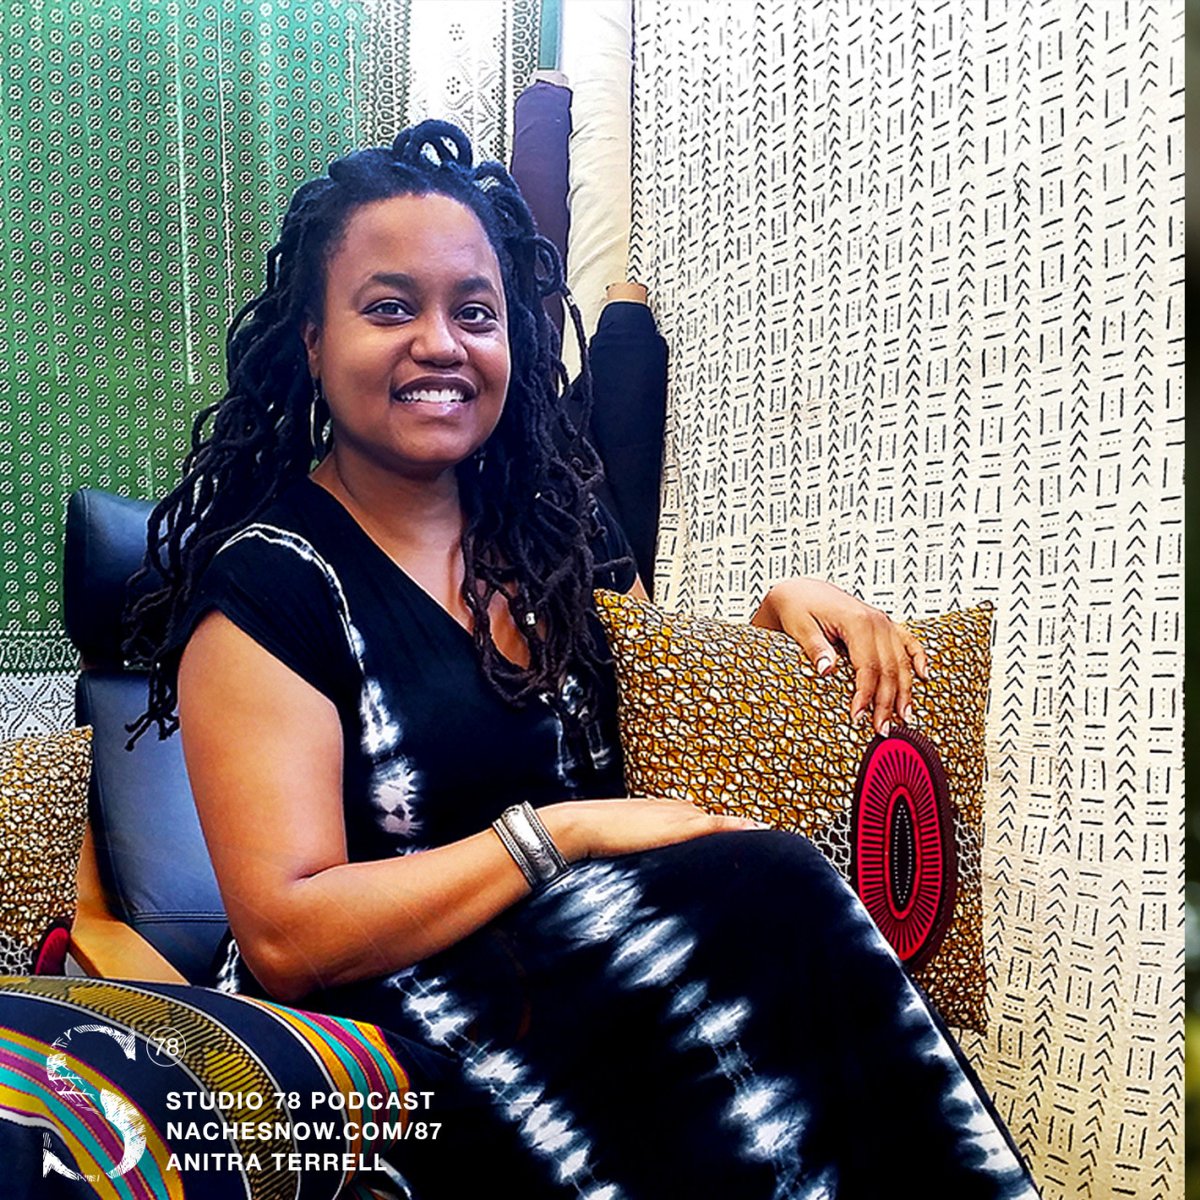 Listen to how Anitra from Reflektion Design started a African home decor business after being laid off. bit.ly/2JHkXiI | Studio 78 Podcast #ankara #africandesign #podsincolor #creativeentrepreneur